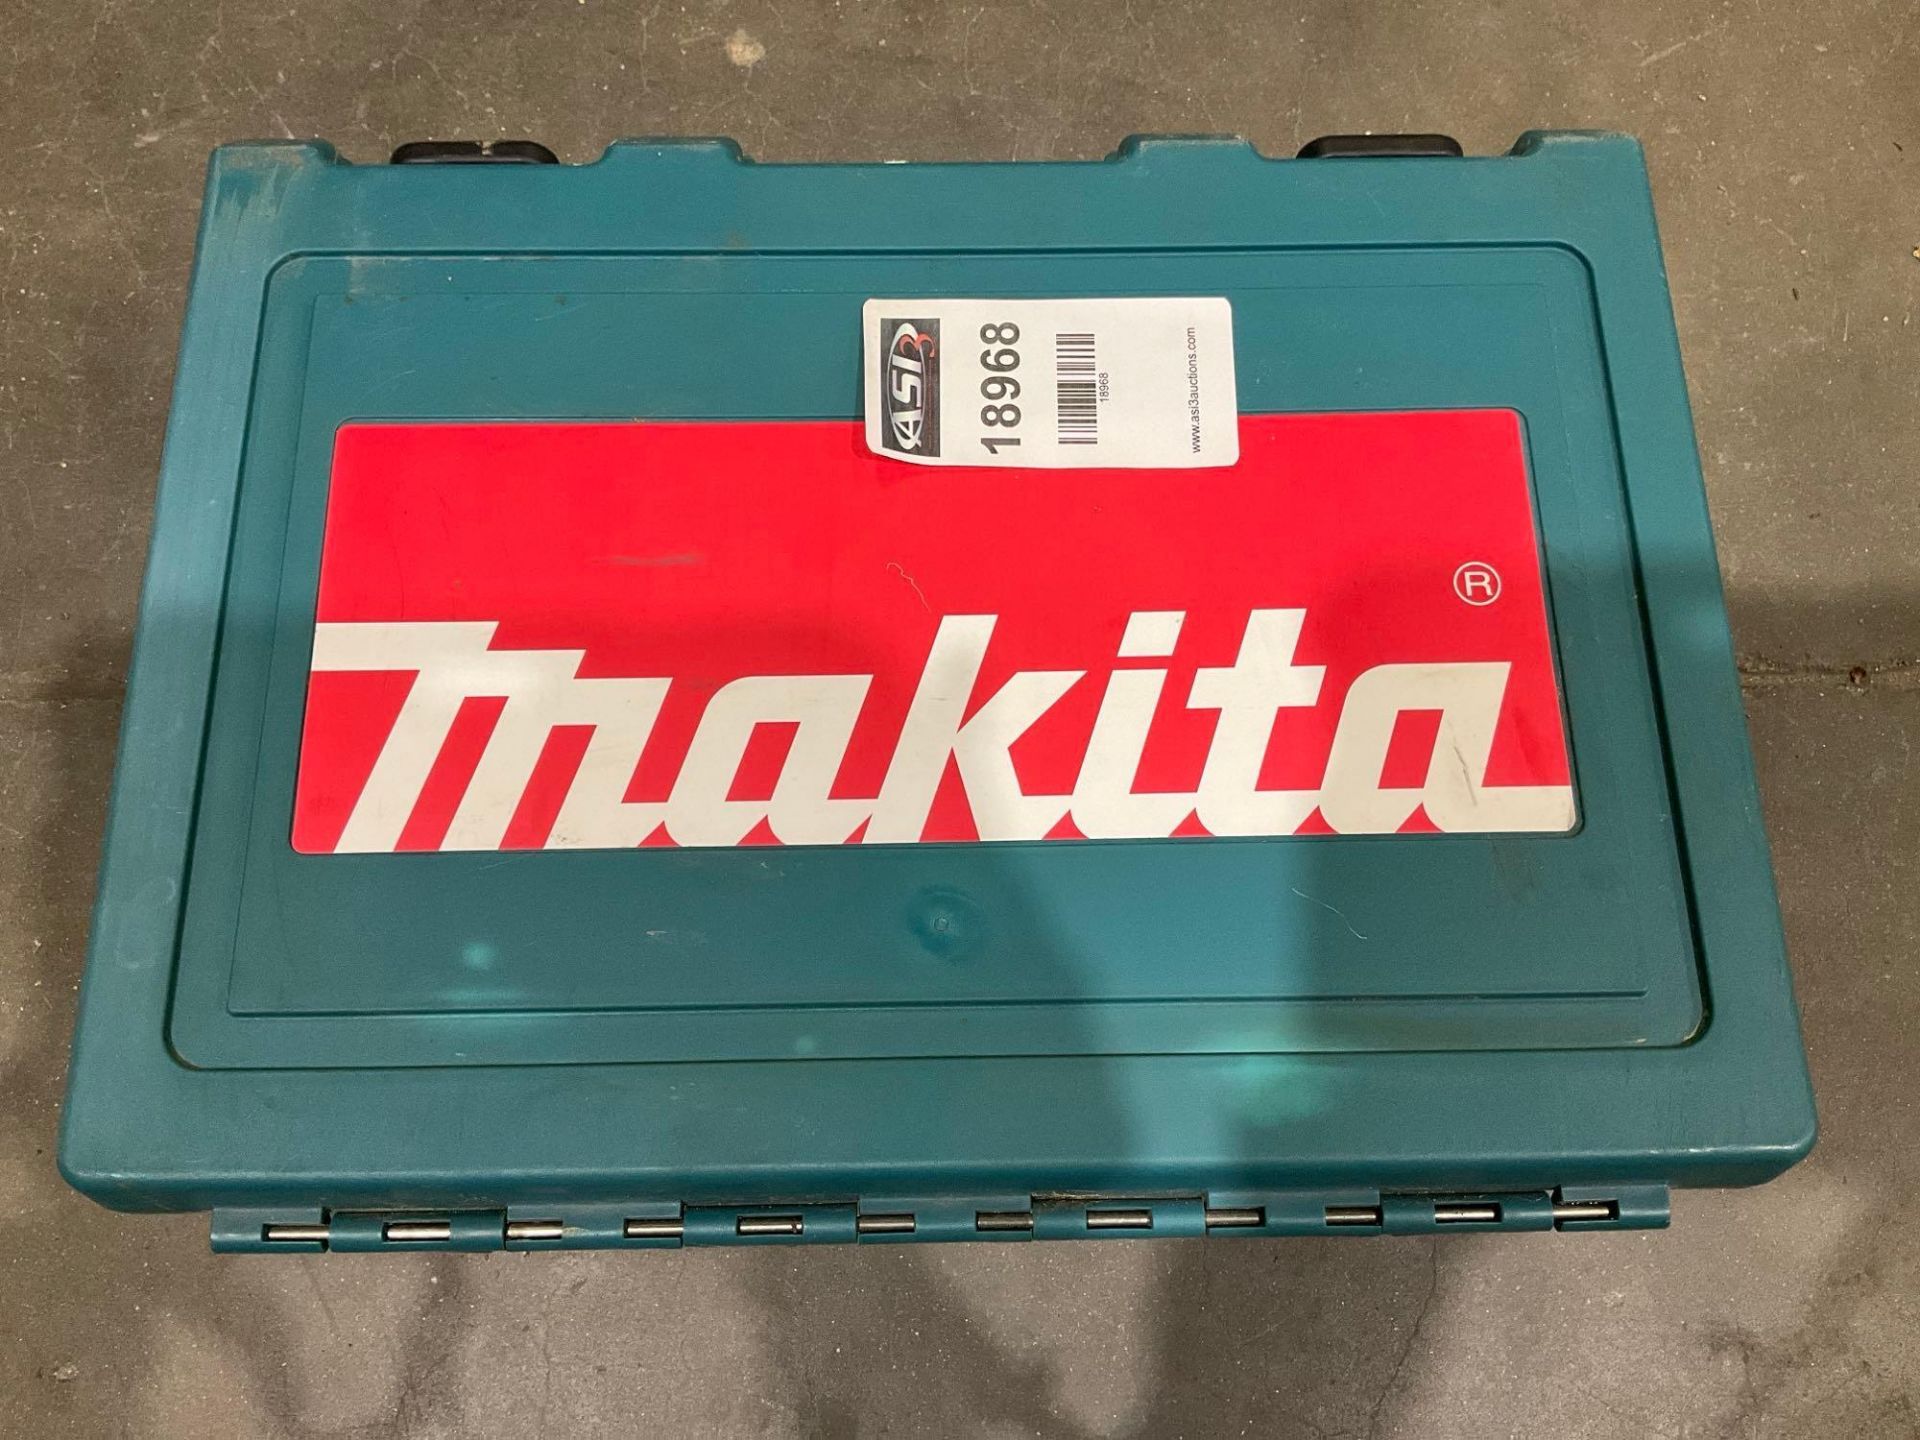 MAKITA 2 SPEED HAMMER DRILL MODEL HP2050 WITH CARRYING CASE , 120VOLTS, 6.6A, RECONDITIONED - Bild 6 aus 6